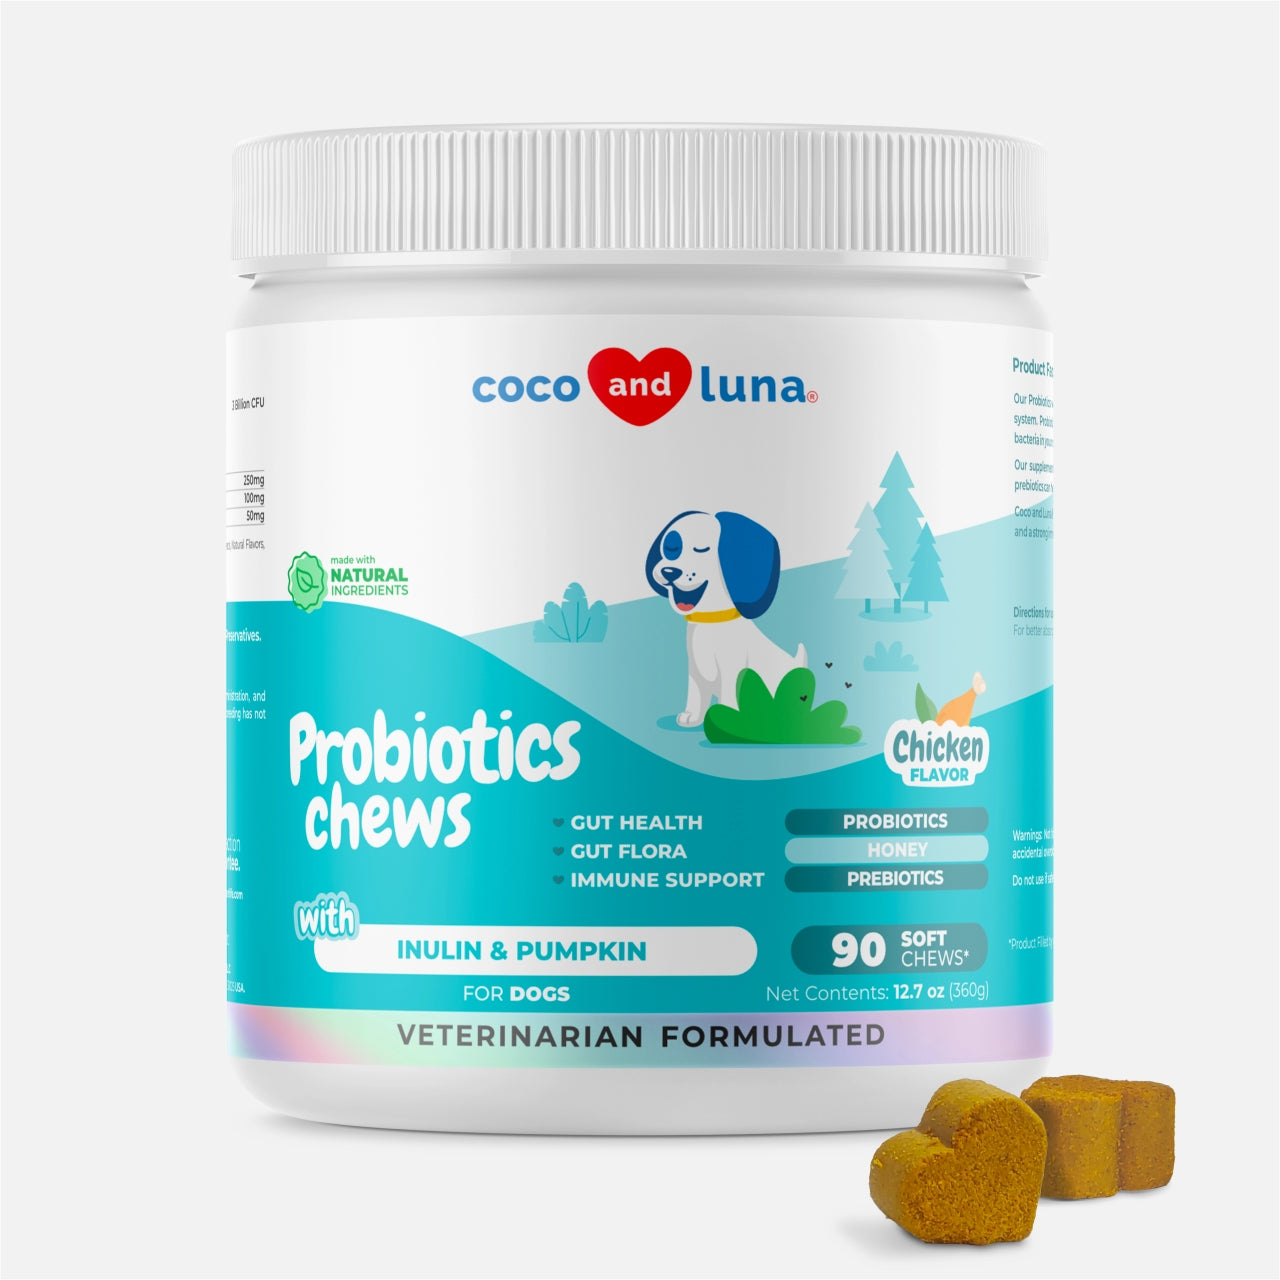 Probiotics for Dogs - 90 Soft Chews - Coco and Luna